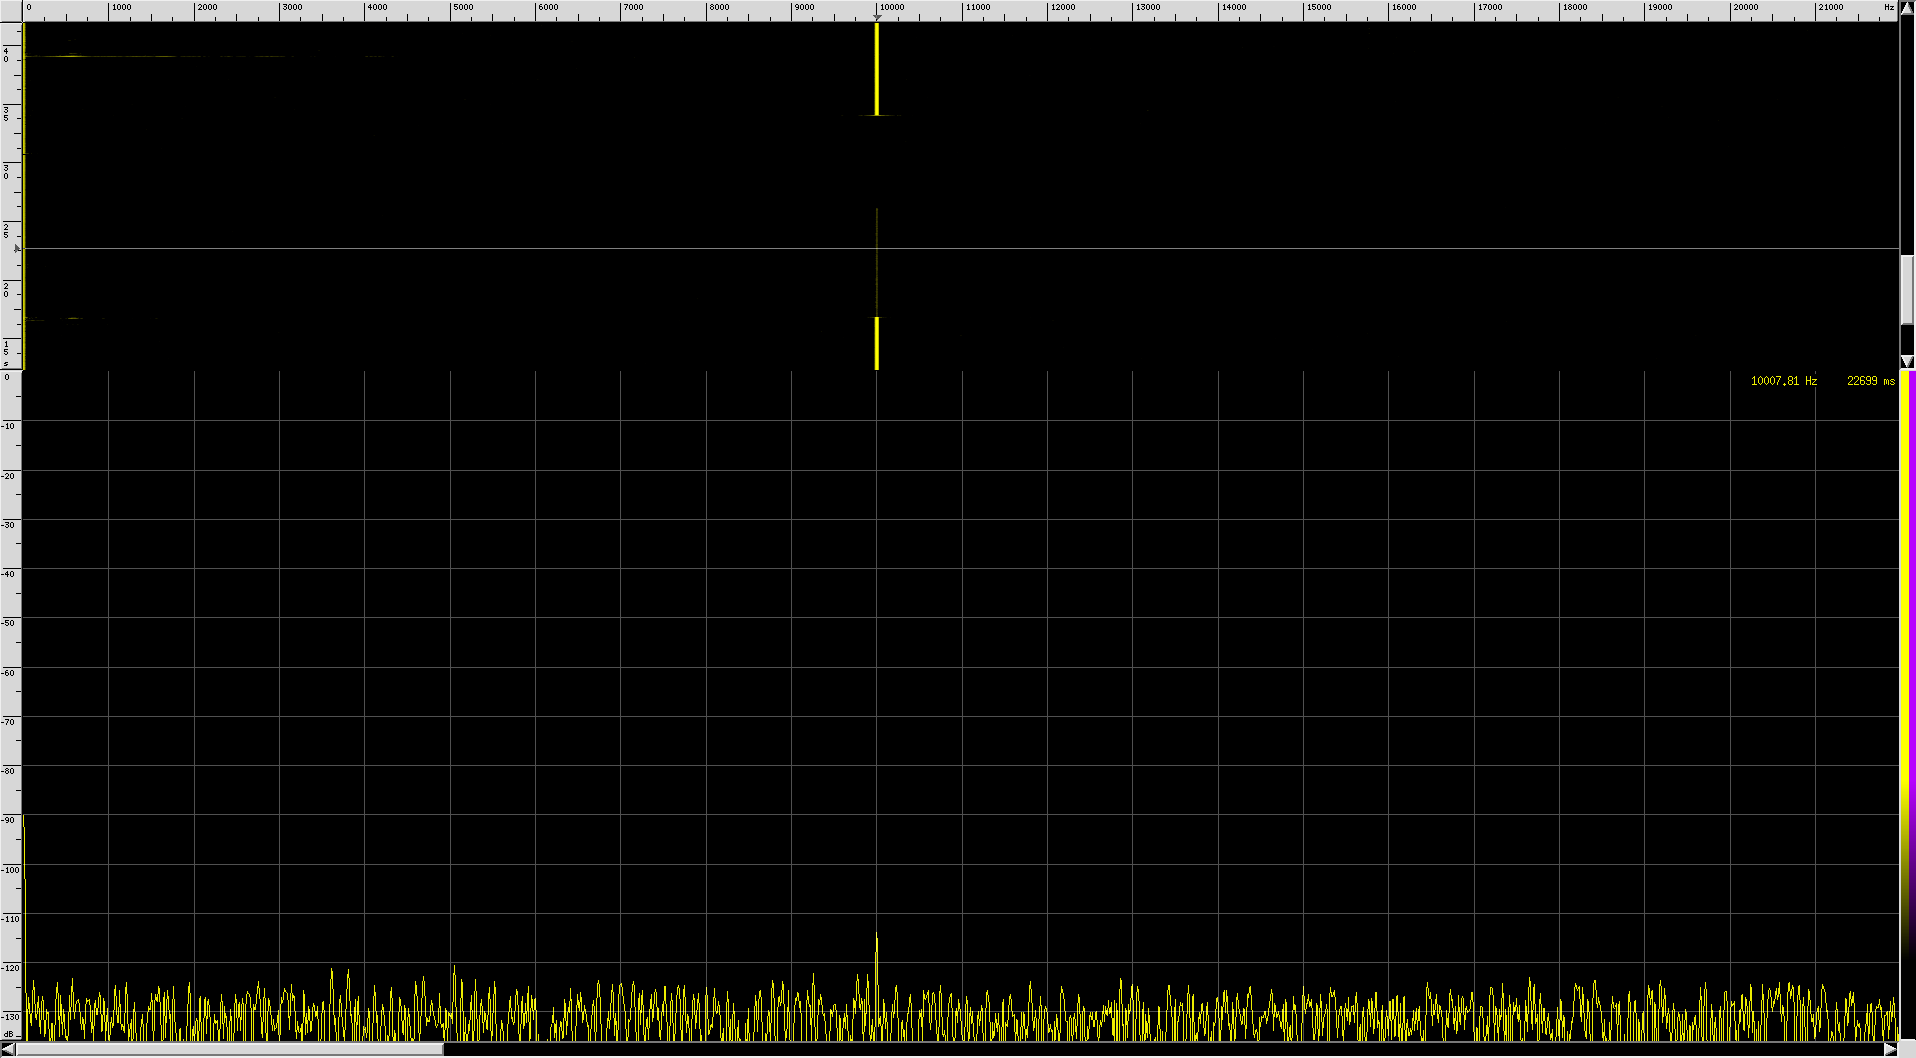 baudline_spectro_preamp_off.png